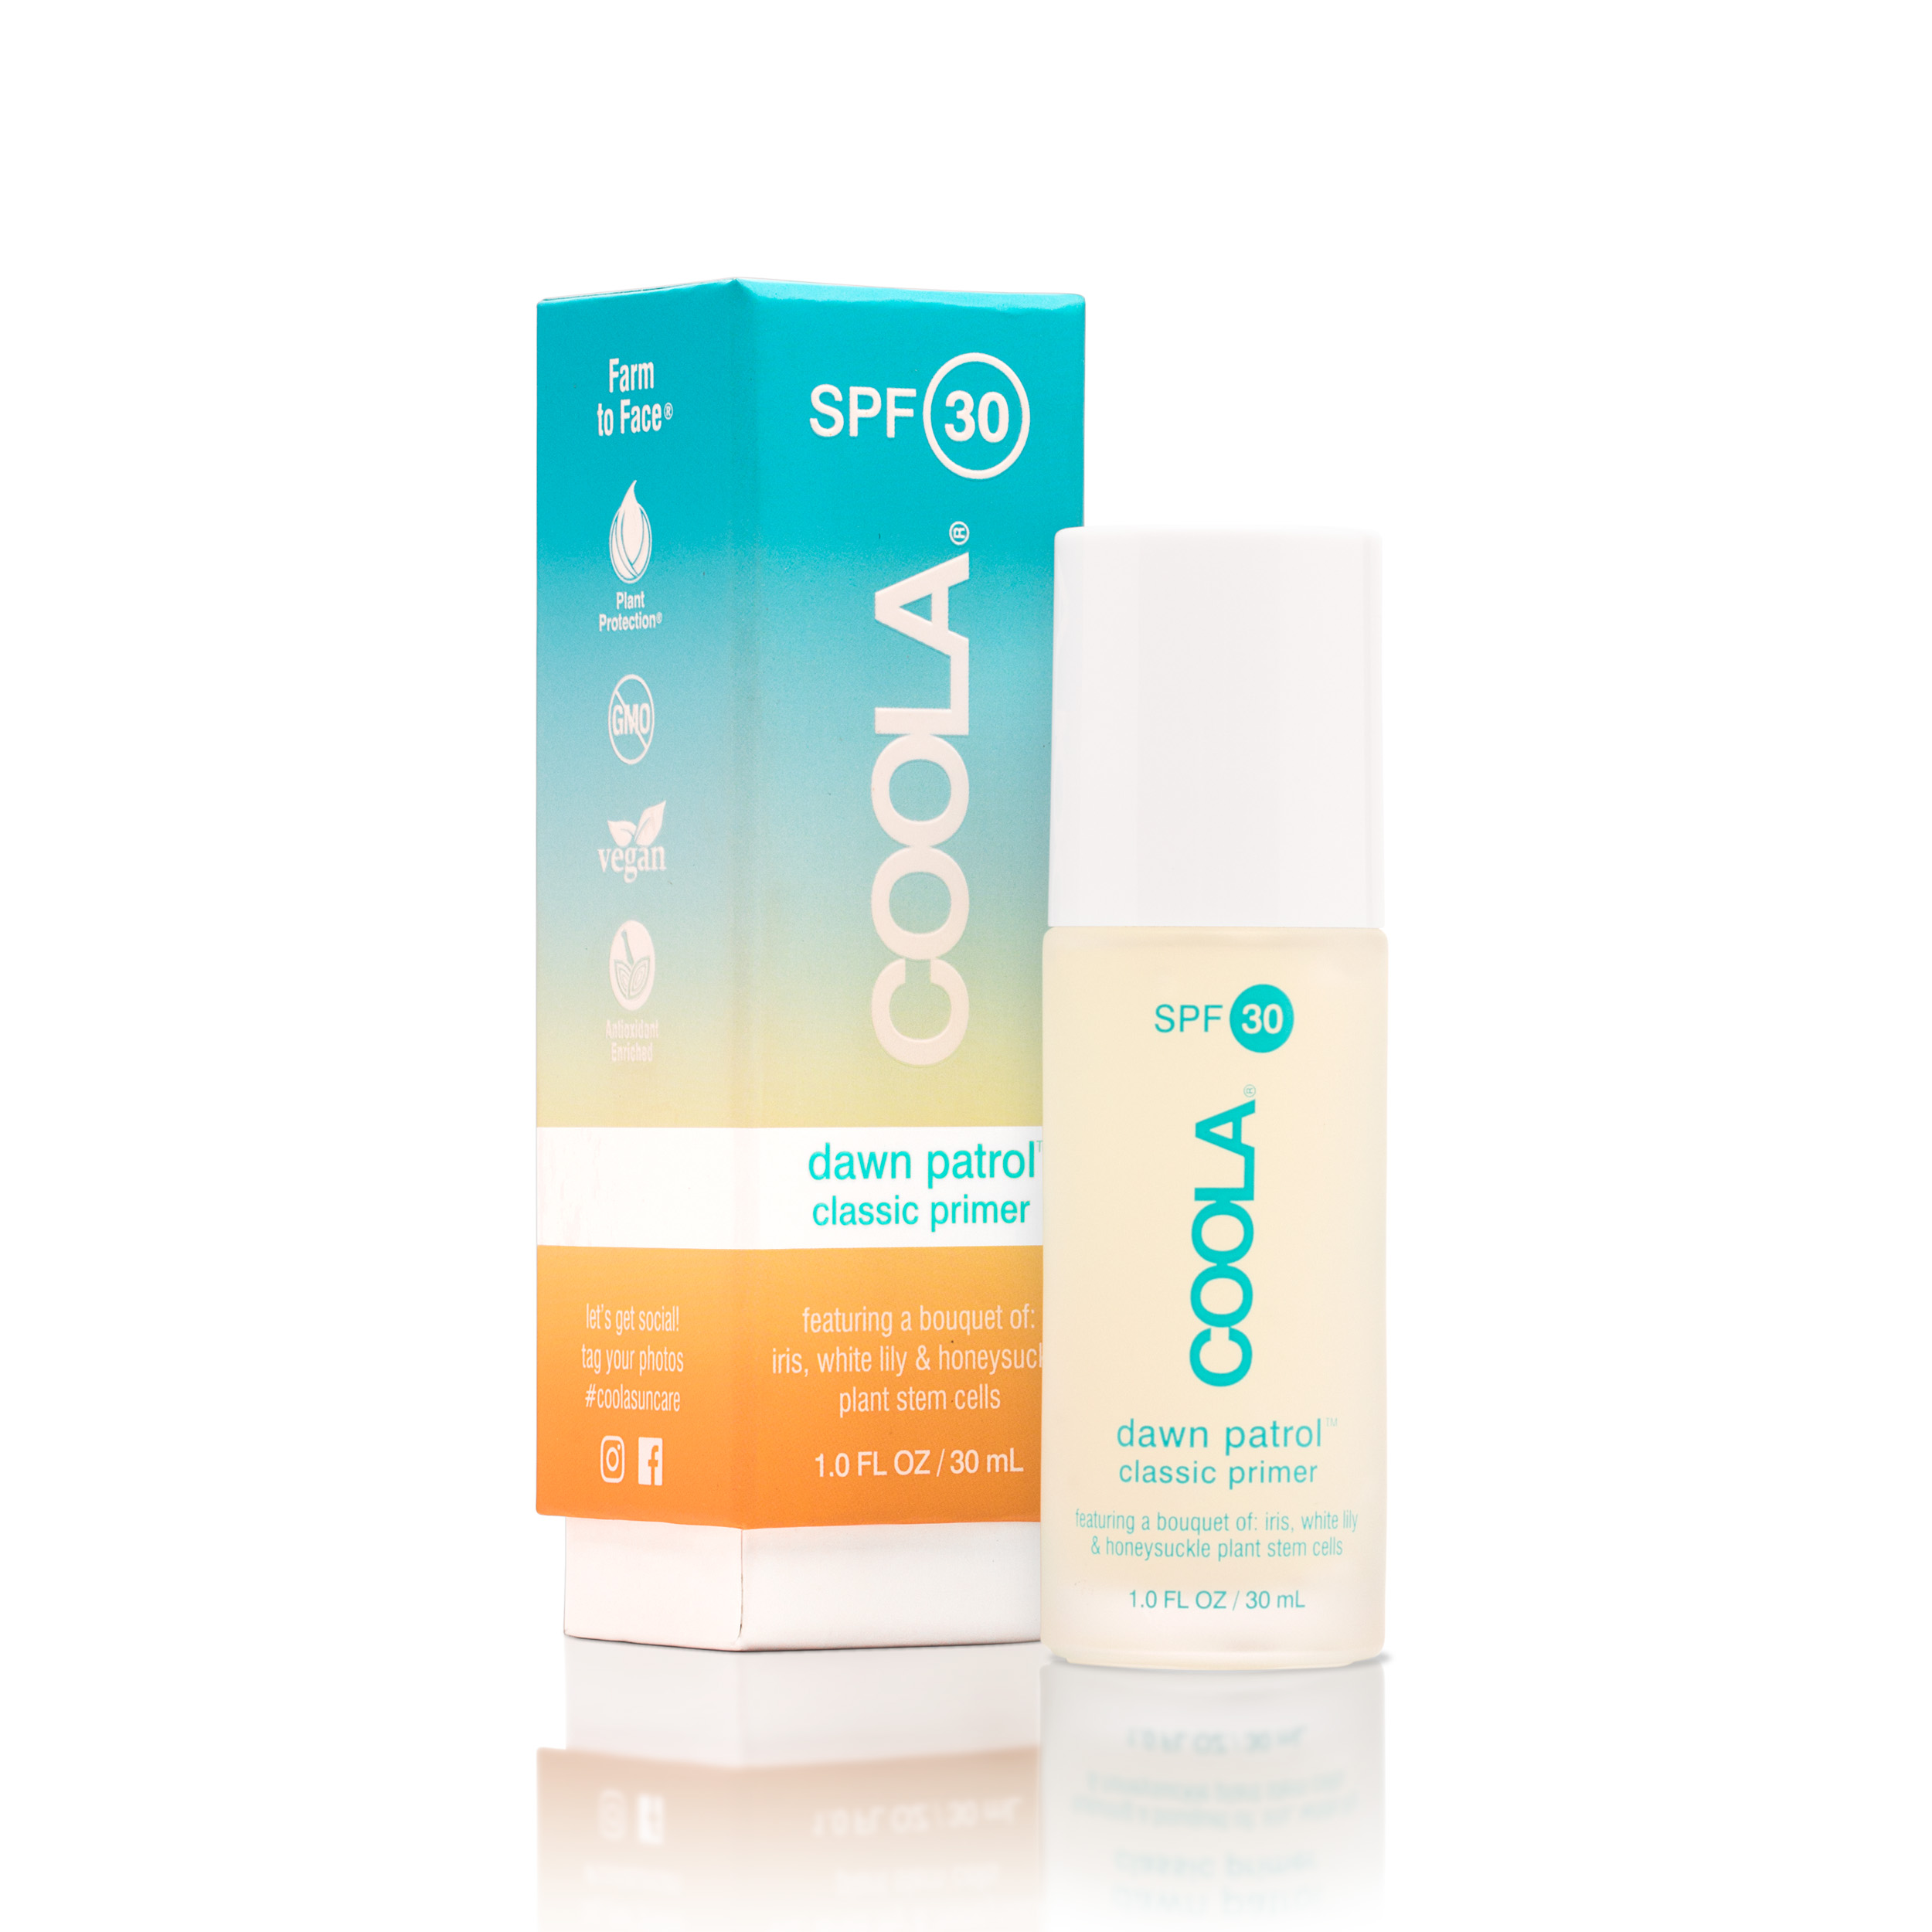 We never travel (or go to a junk) without our organic COOLA sunscreen